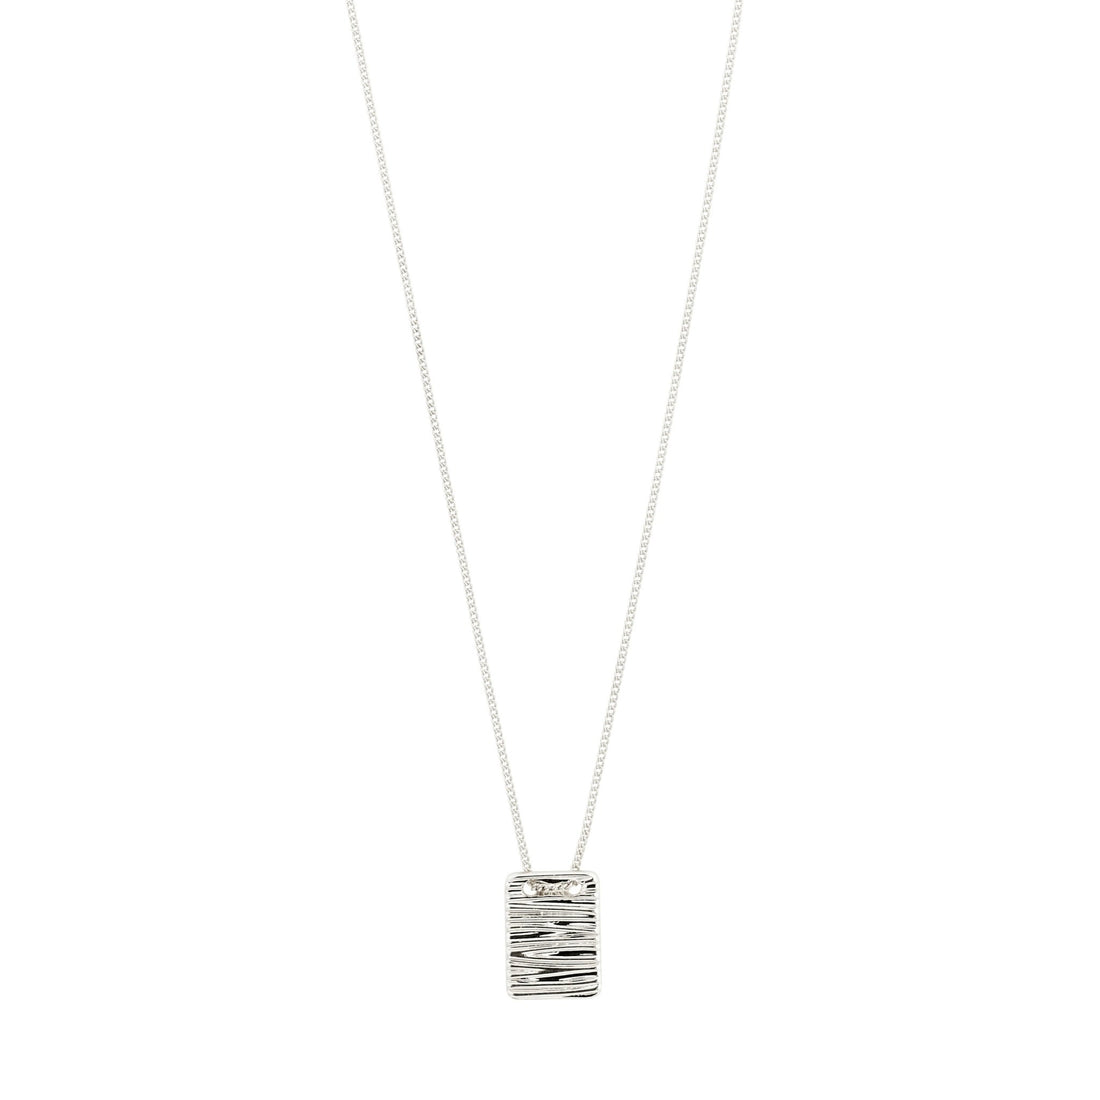 CARE recycled square coin necklace - PILGRIM